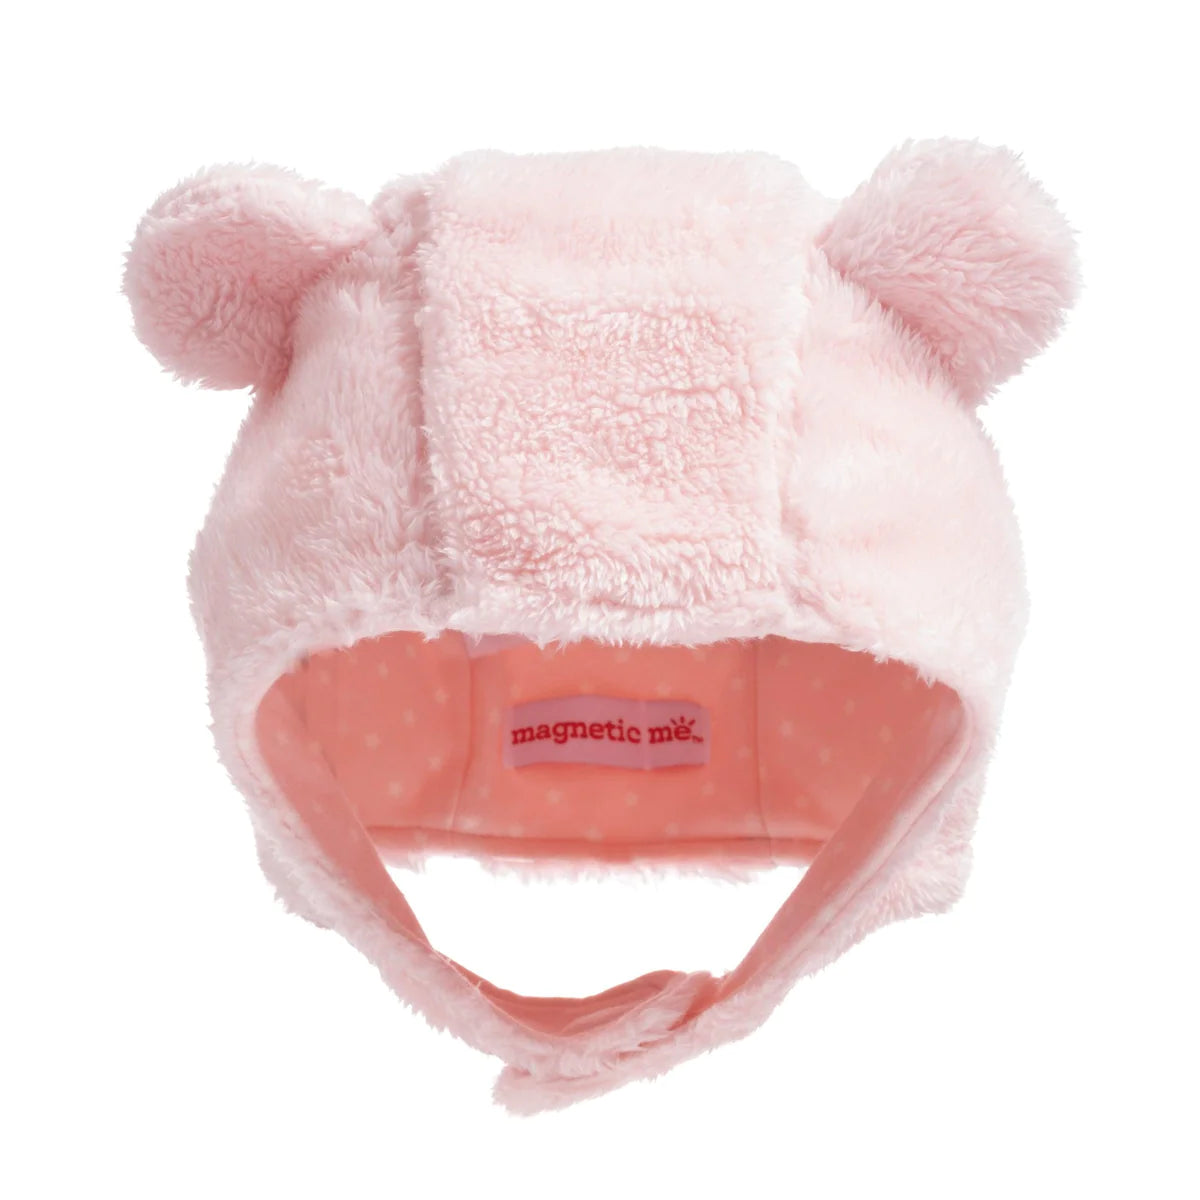 magnetic me: pink blossom minky magnetic easy close cozy cap